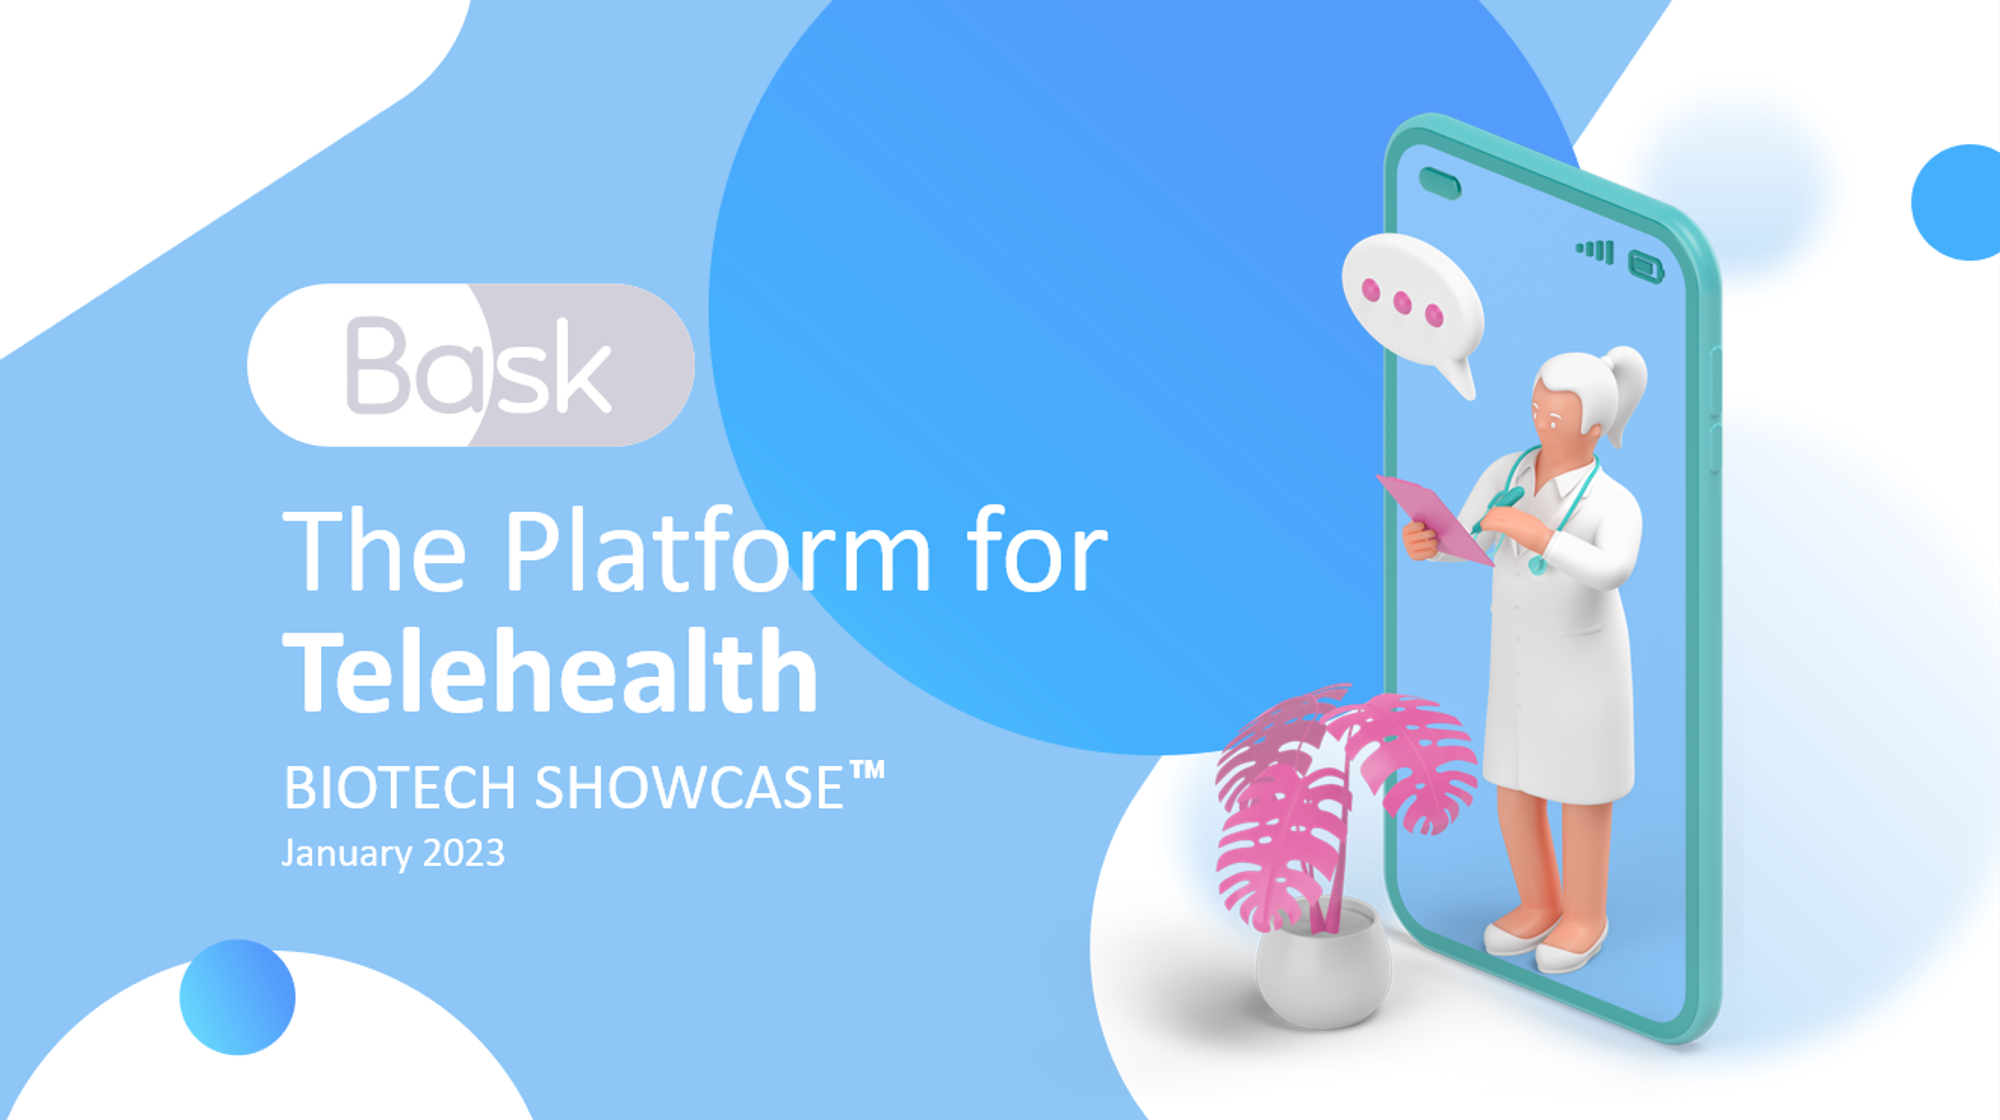 BASK HEALTH TO PRESENT AT BIOTECH SHOWCASE™ 2023: The Platform for Telehealth